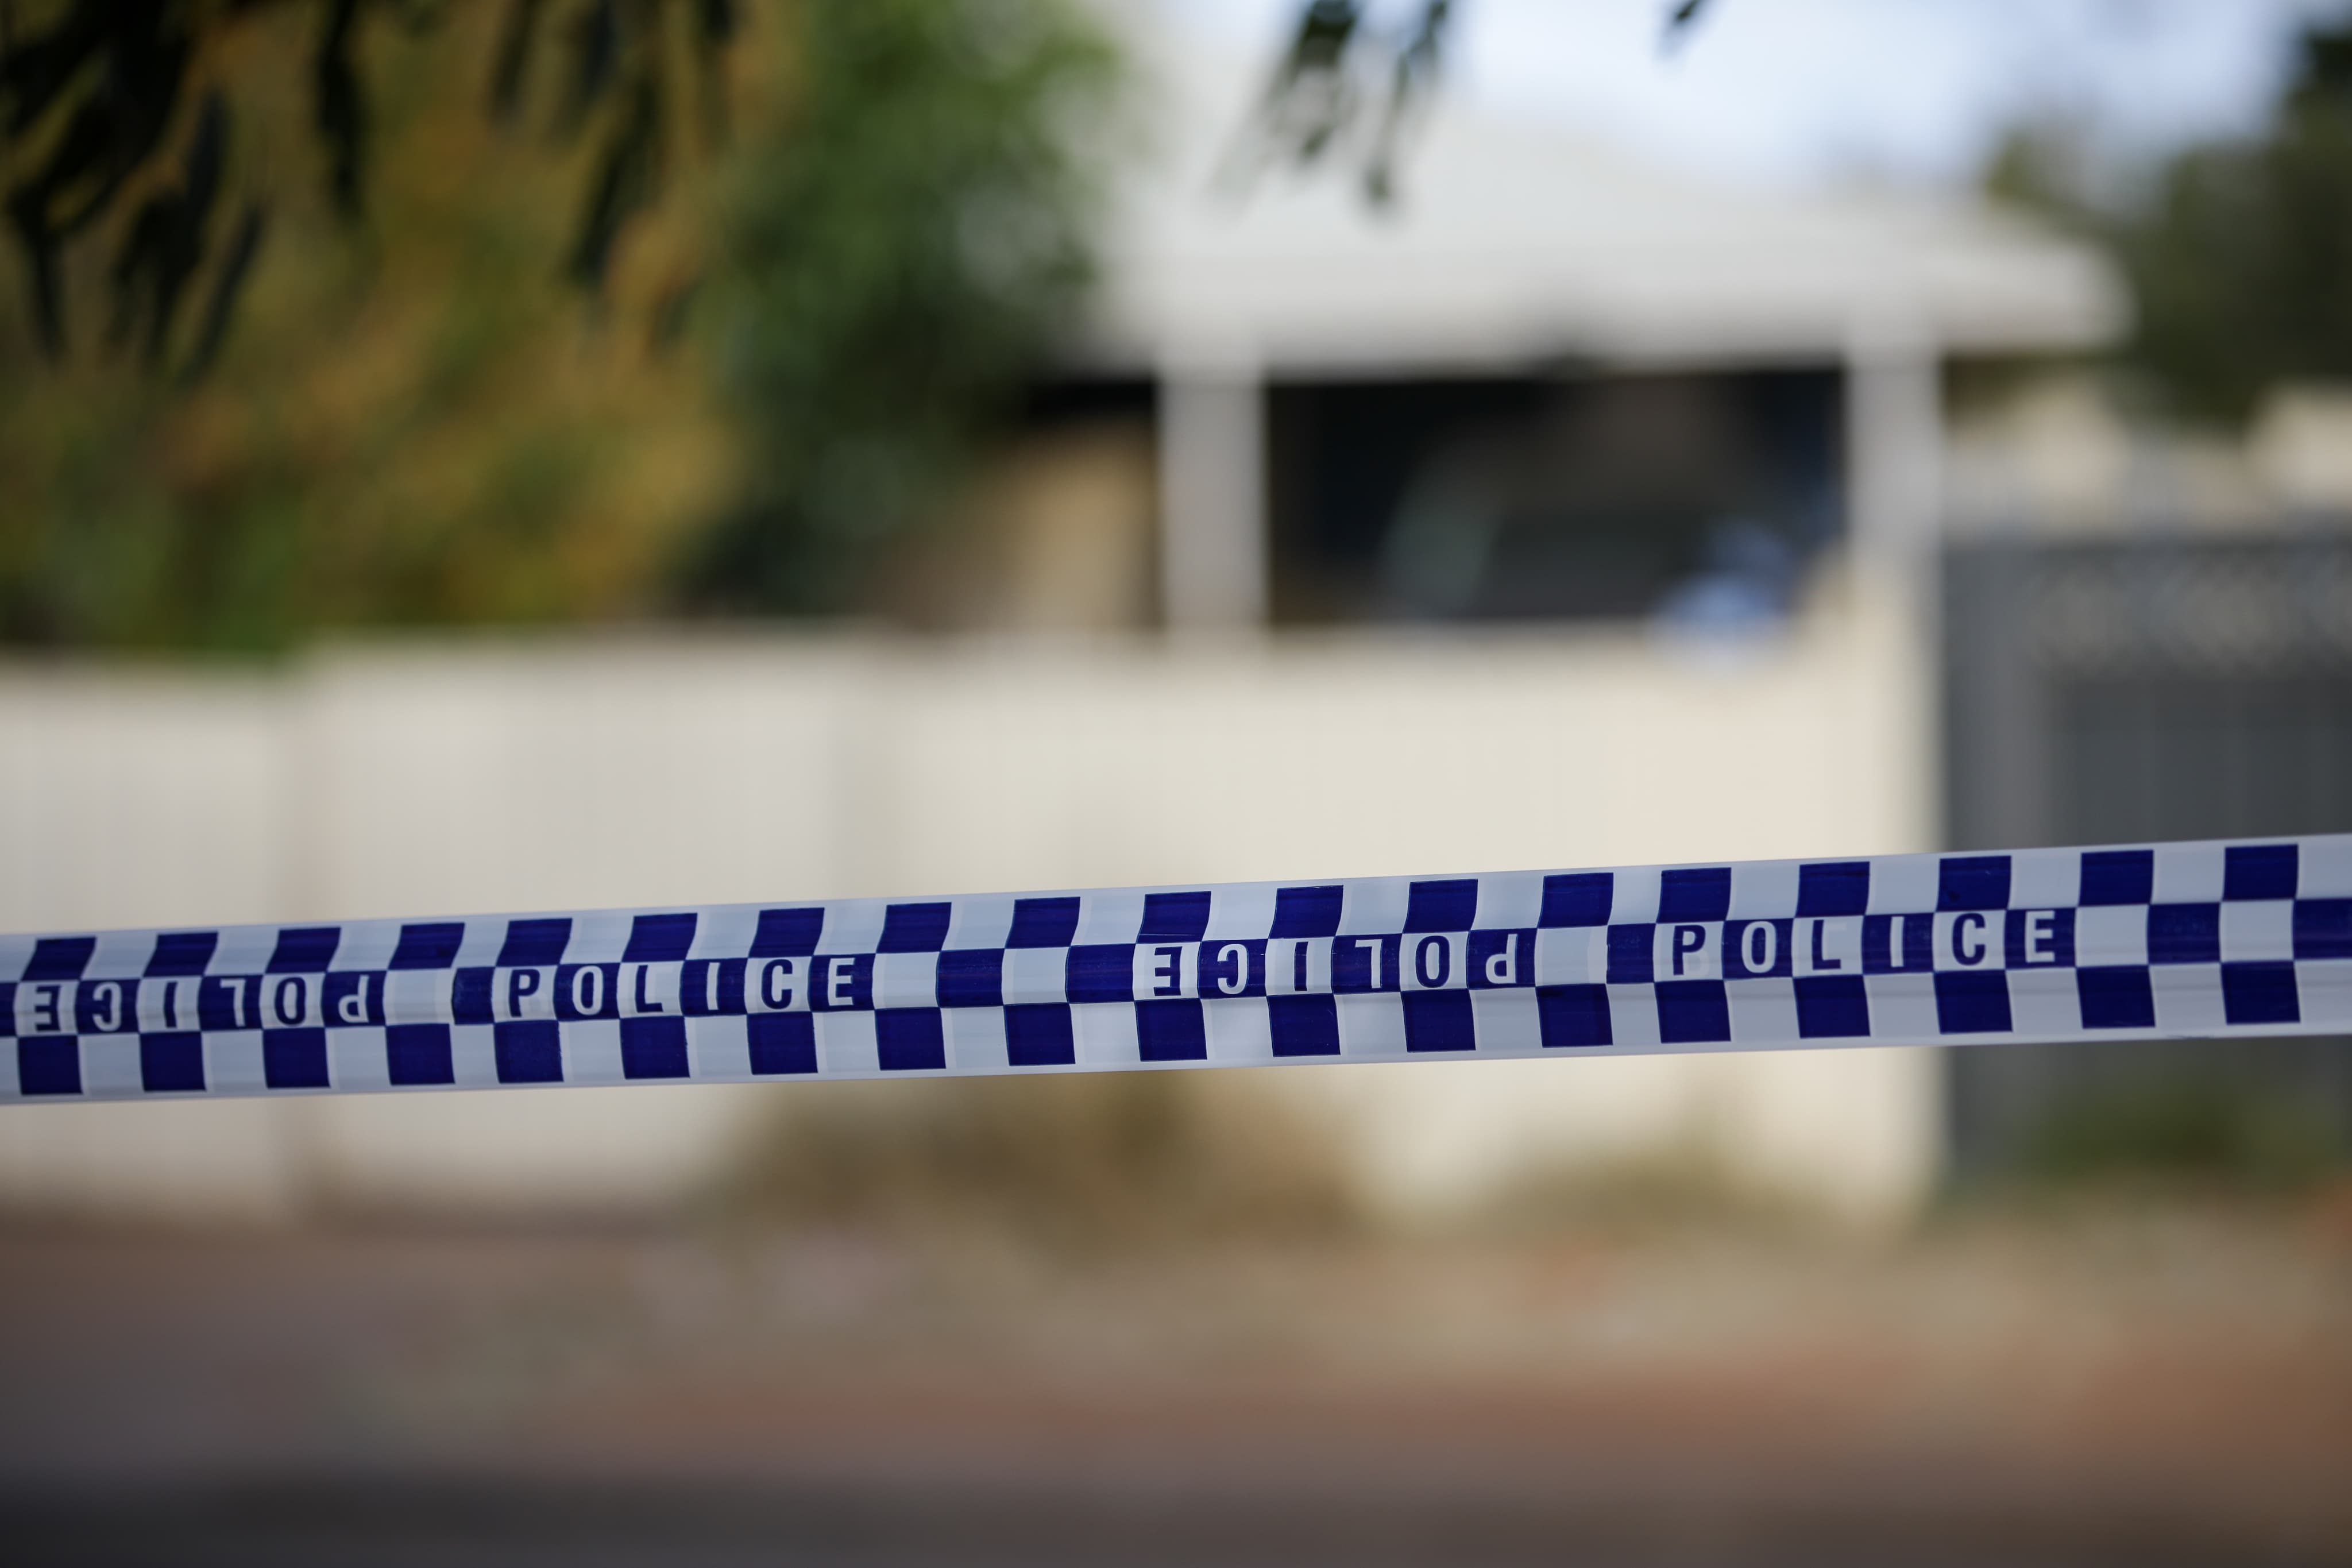 Bodies of Australian Couple Found After Police Officer Charged With Murder